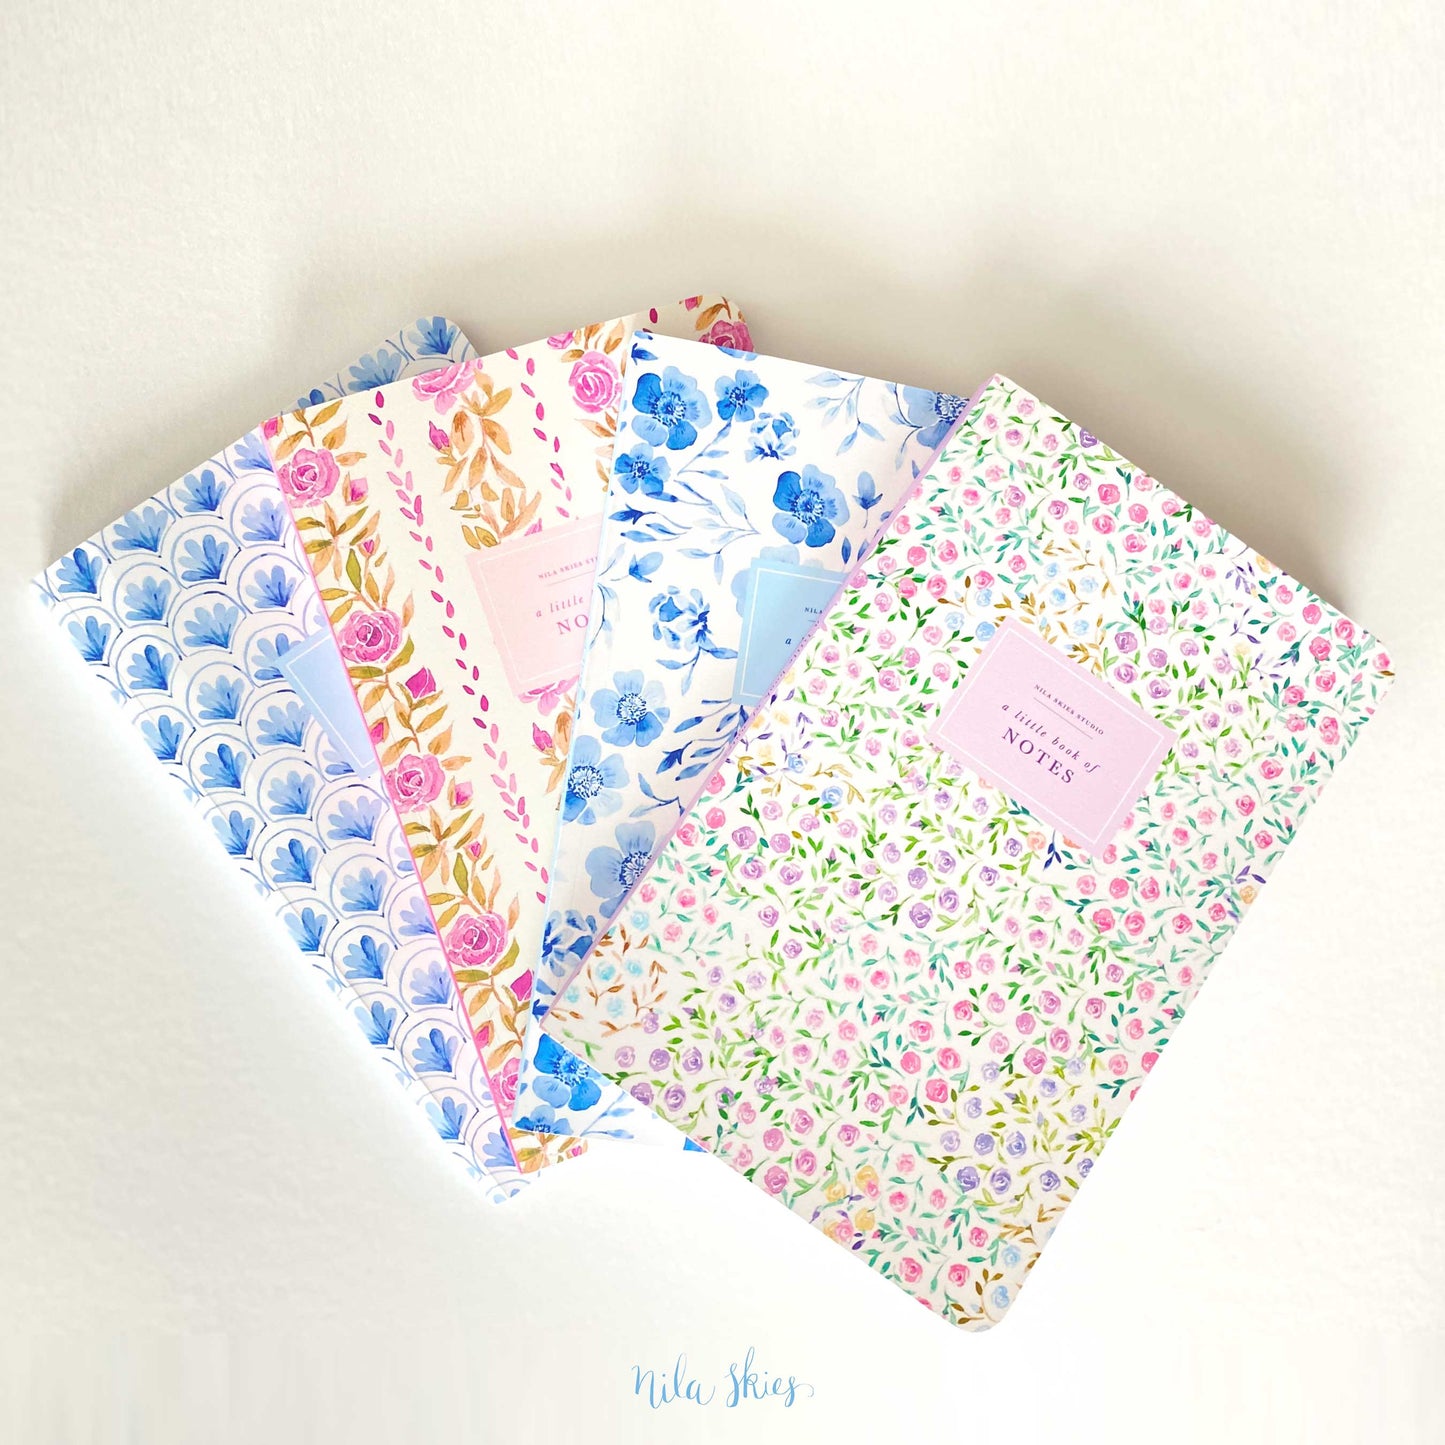 Blue Watercolor Floral Notebook